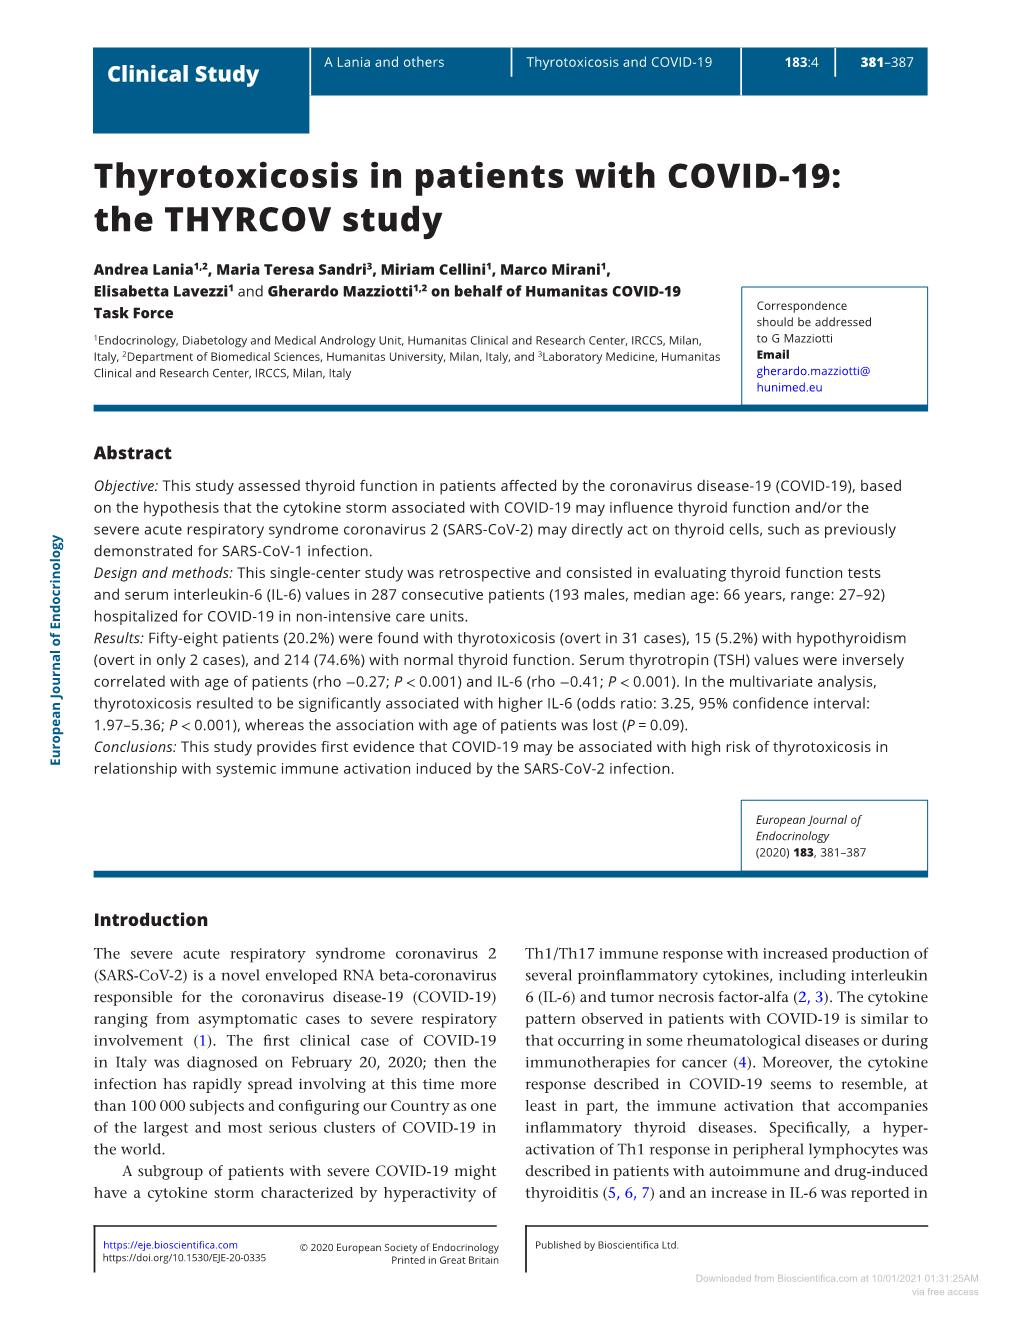 Thyrotoxicosis in Patients with COVID-19: the THYRCOV Study